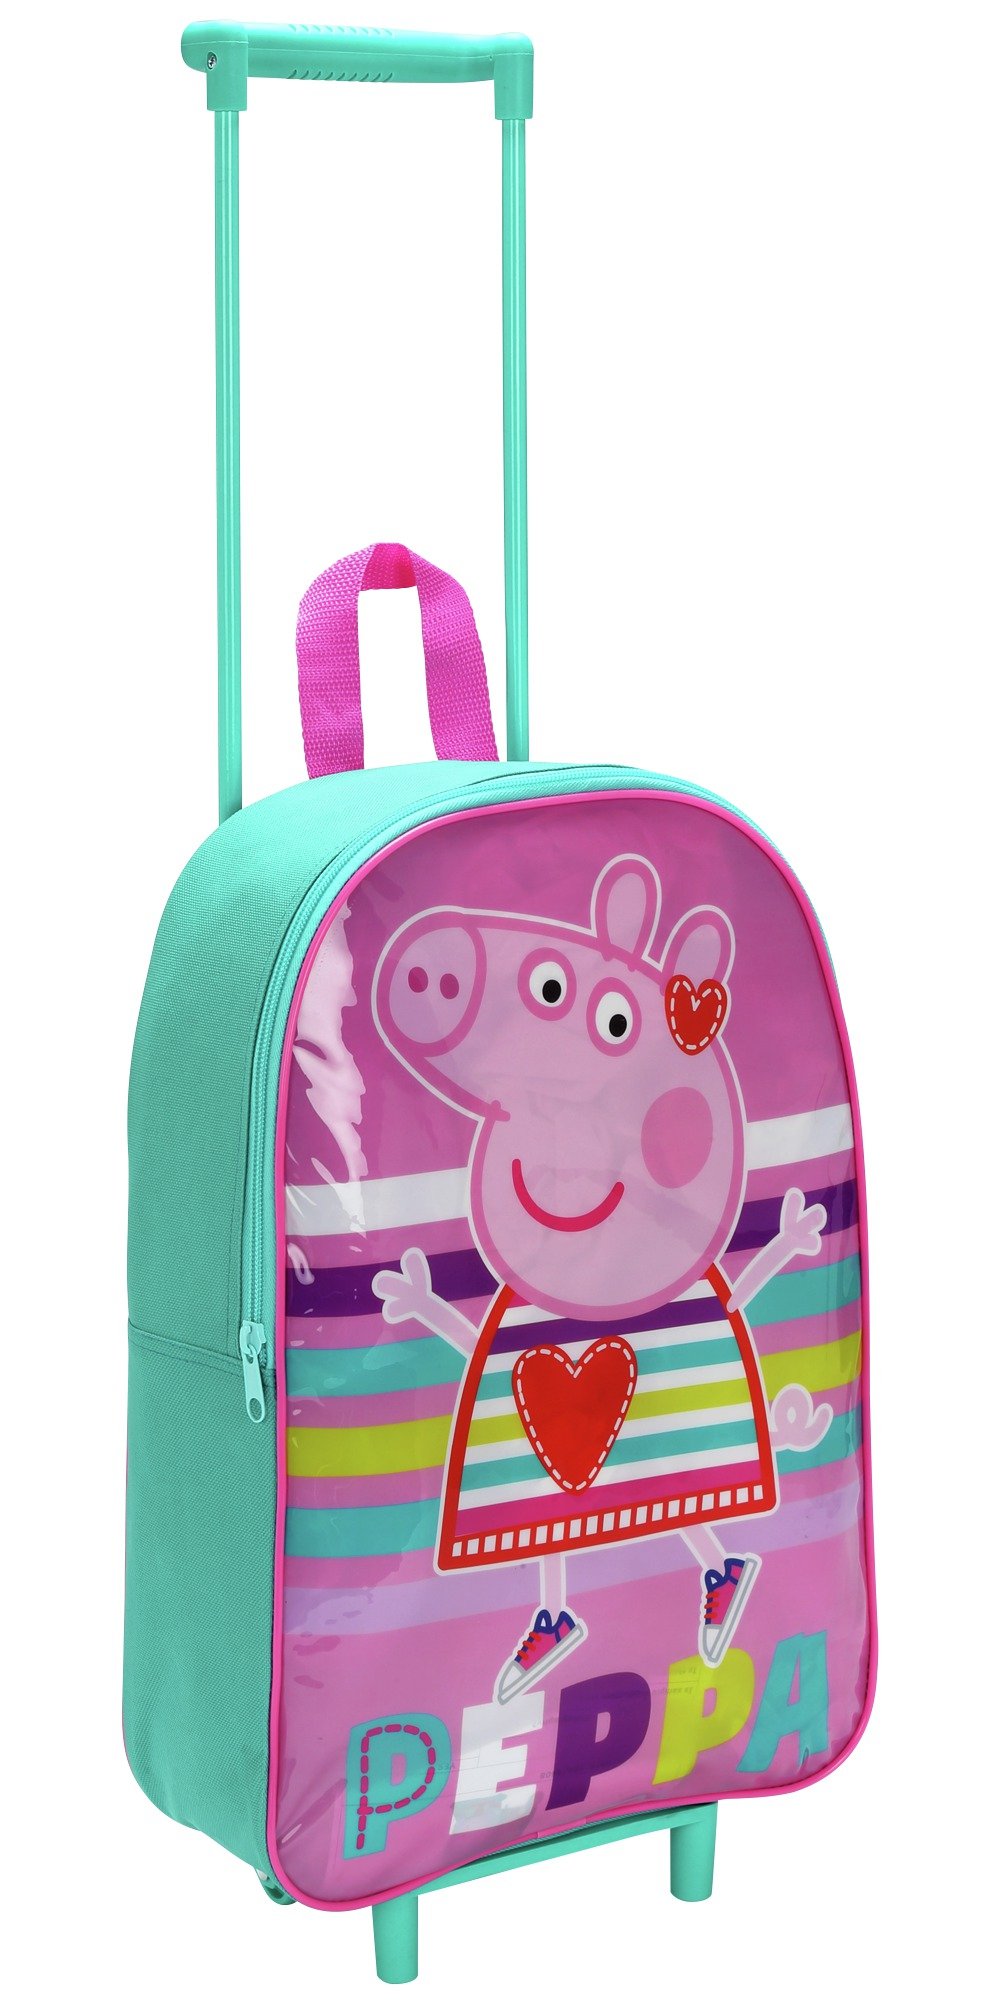 PAW PATROL PEPPA PIG CABIN BAG DELUXE TROLLEY BACK PACK TRAVEL SUITCASE FROZEN 